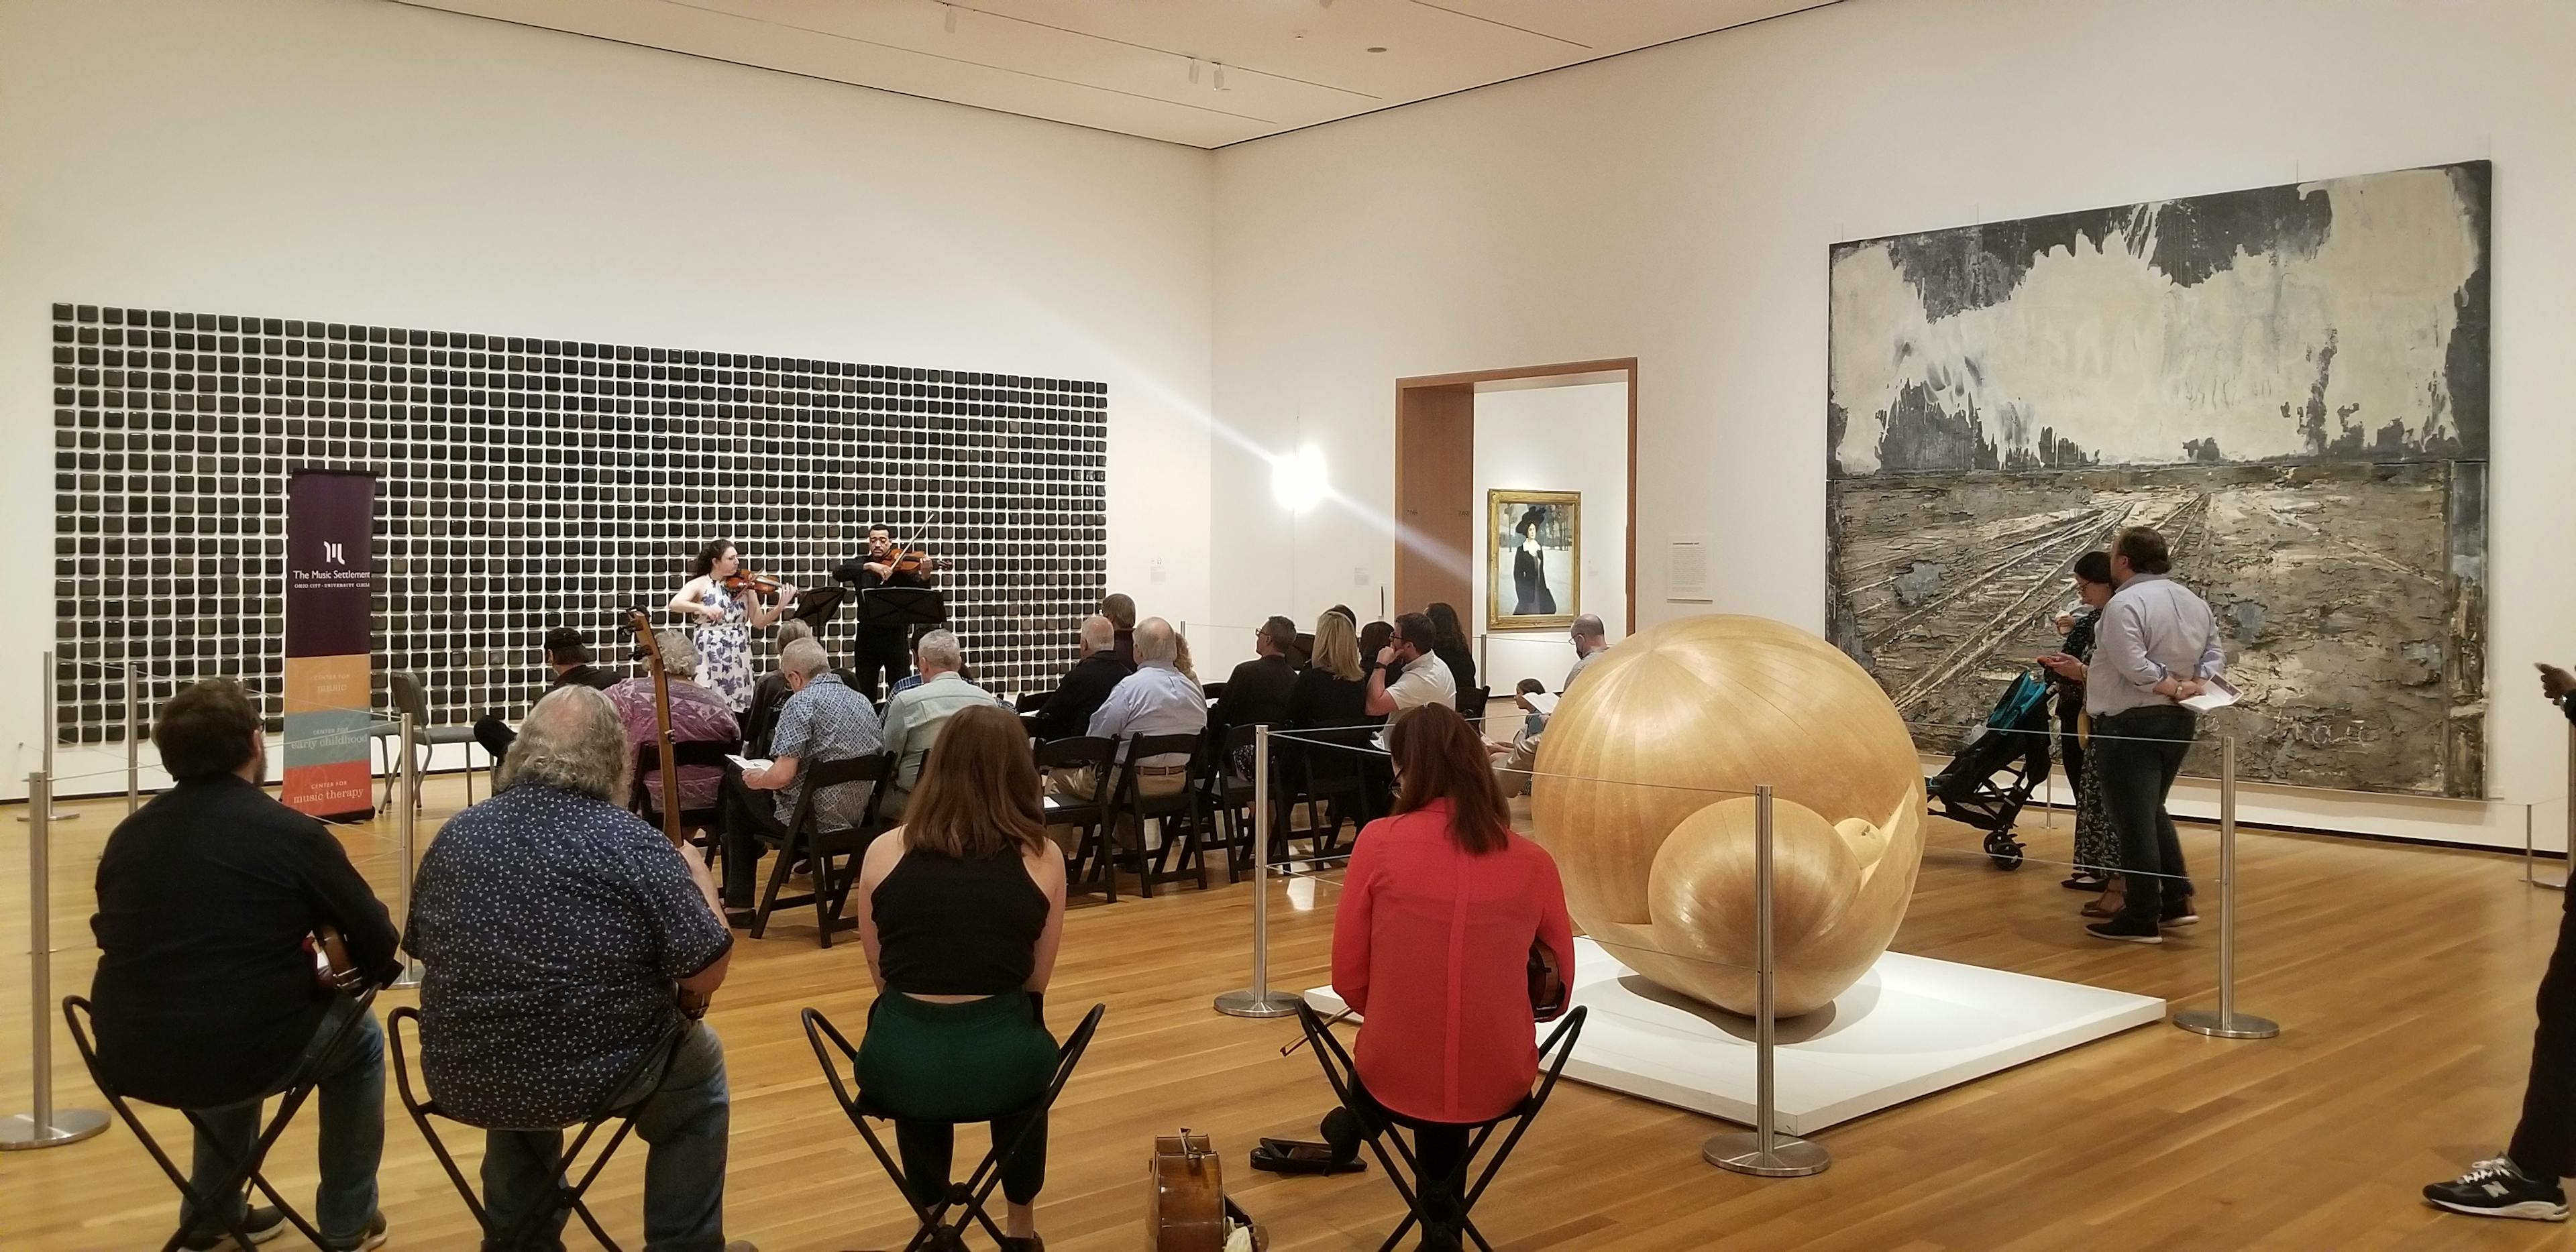 Faculty from The Music Settlement performing in gallery